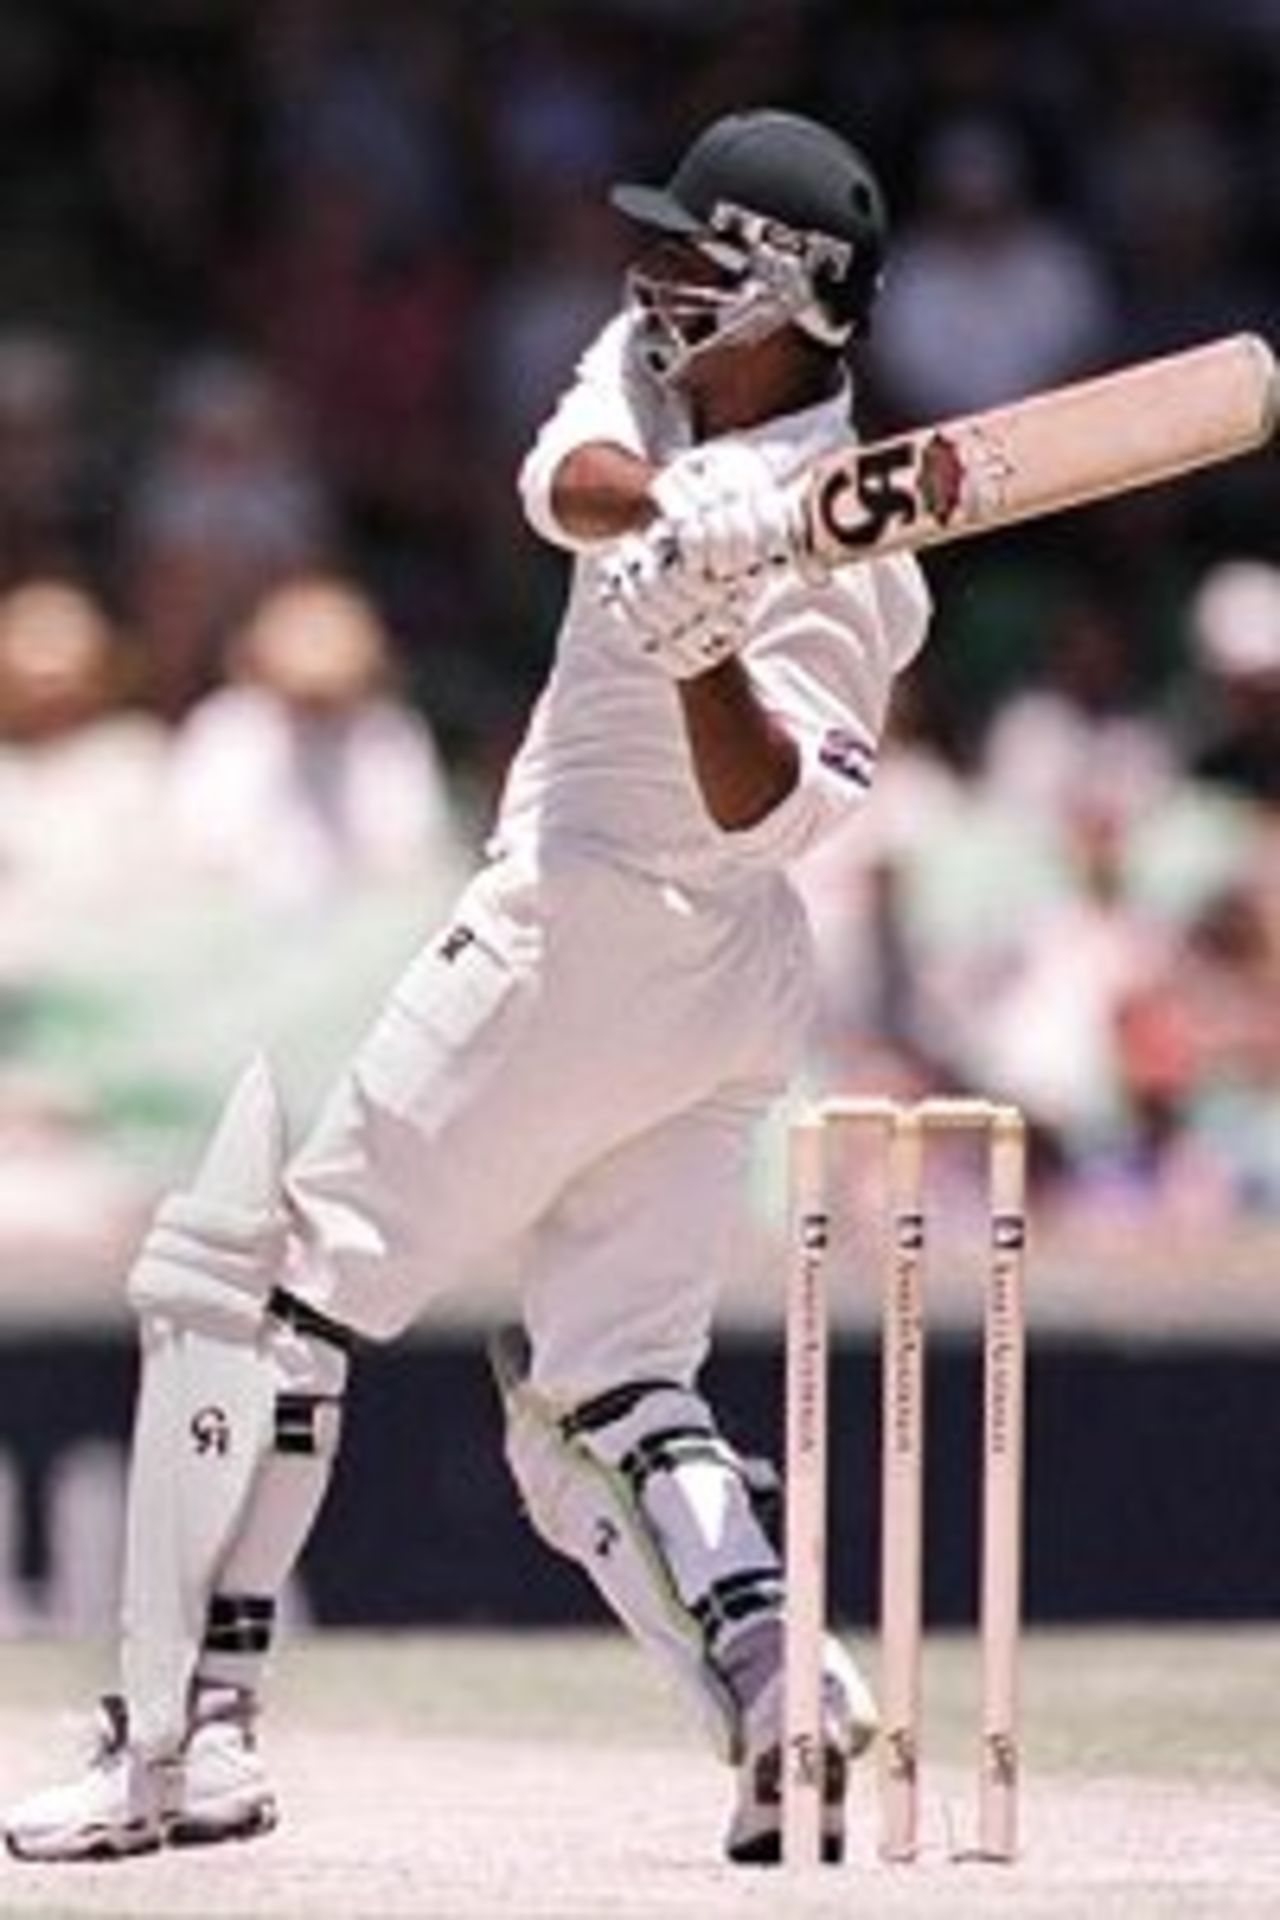 28 Nov 1999: Pakistan batsman Ijaz Ahmed smashes one to the boundry on his way to scoring a century, during day three of the third test played between Australia and Pakistan at the WACA ground in Perth, Western Australia, Australia.